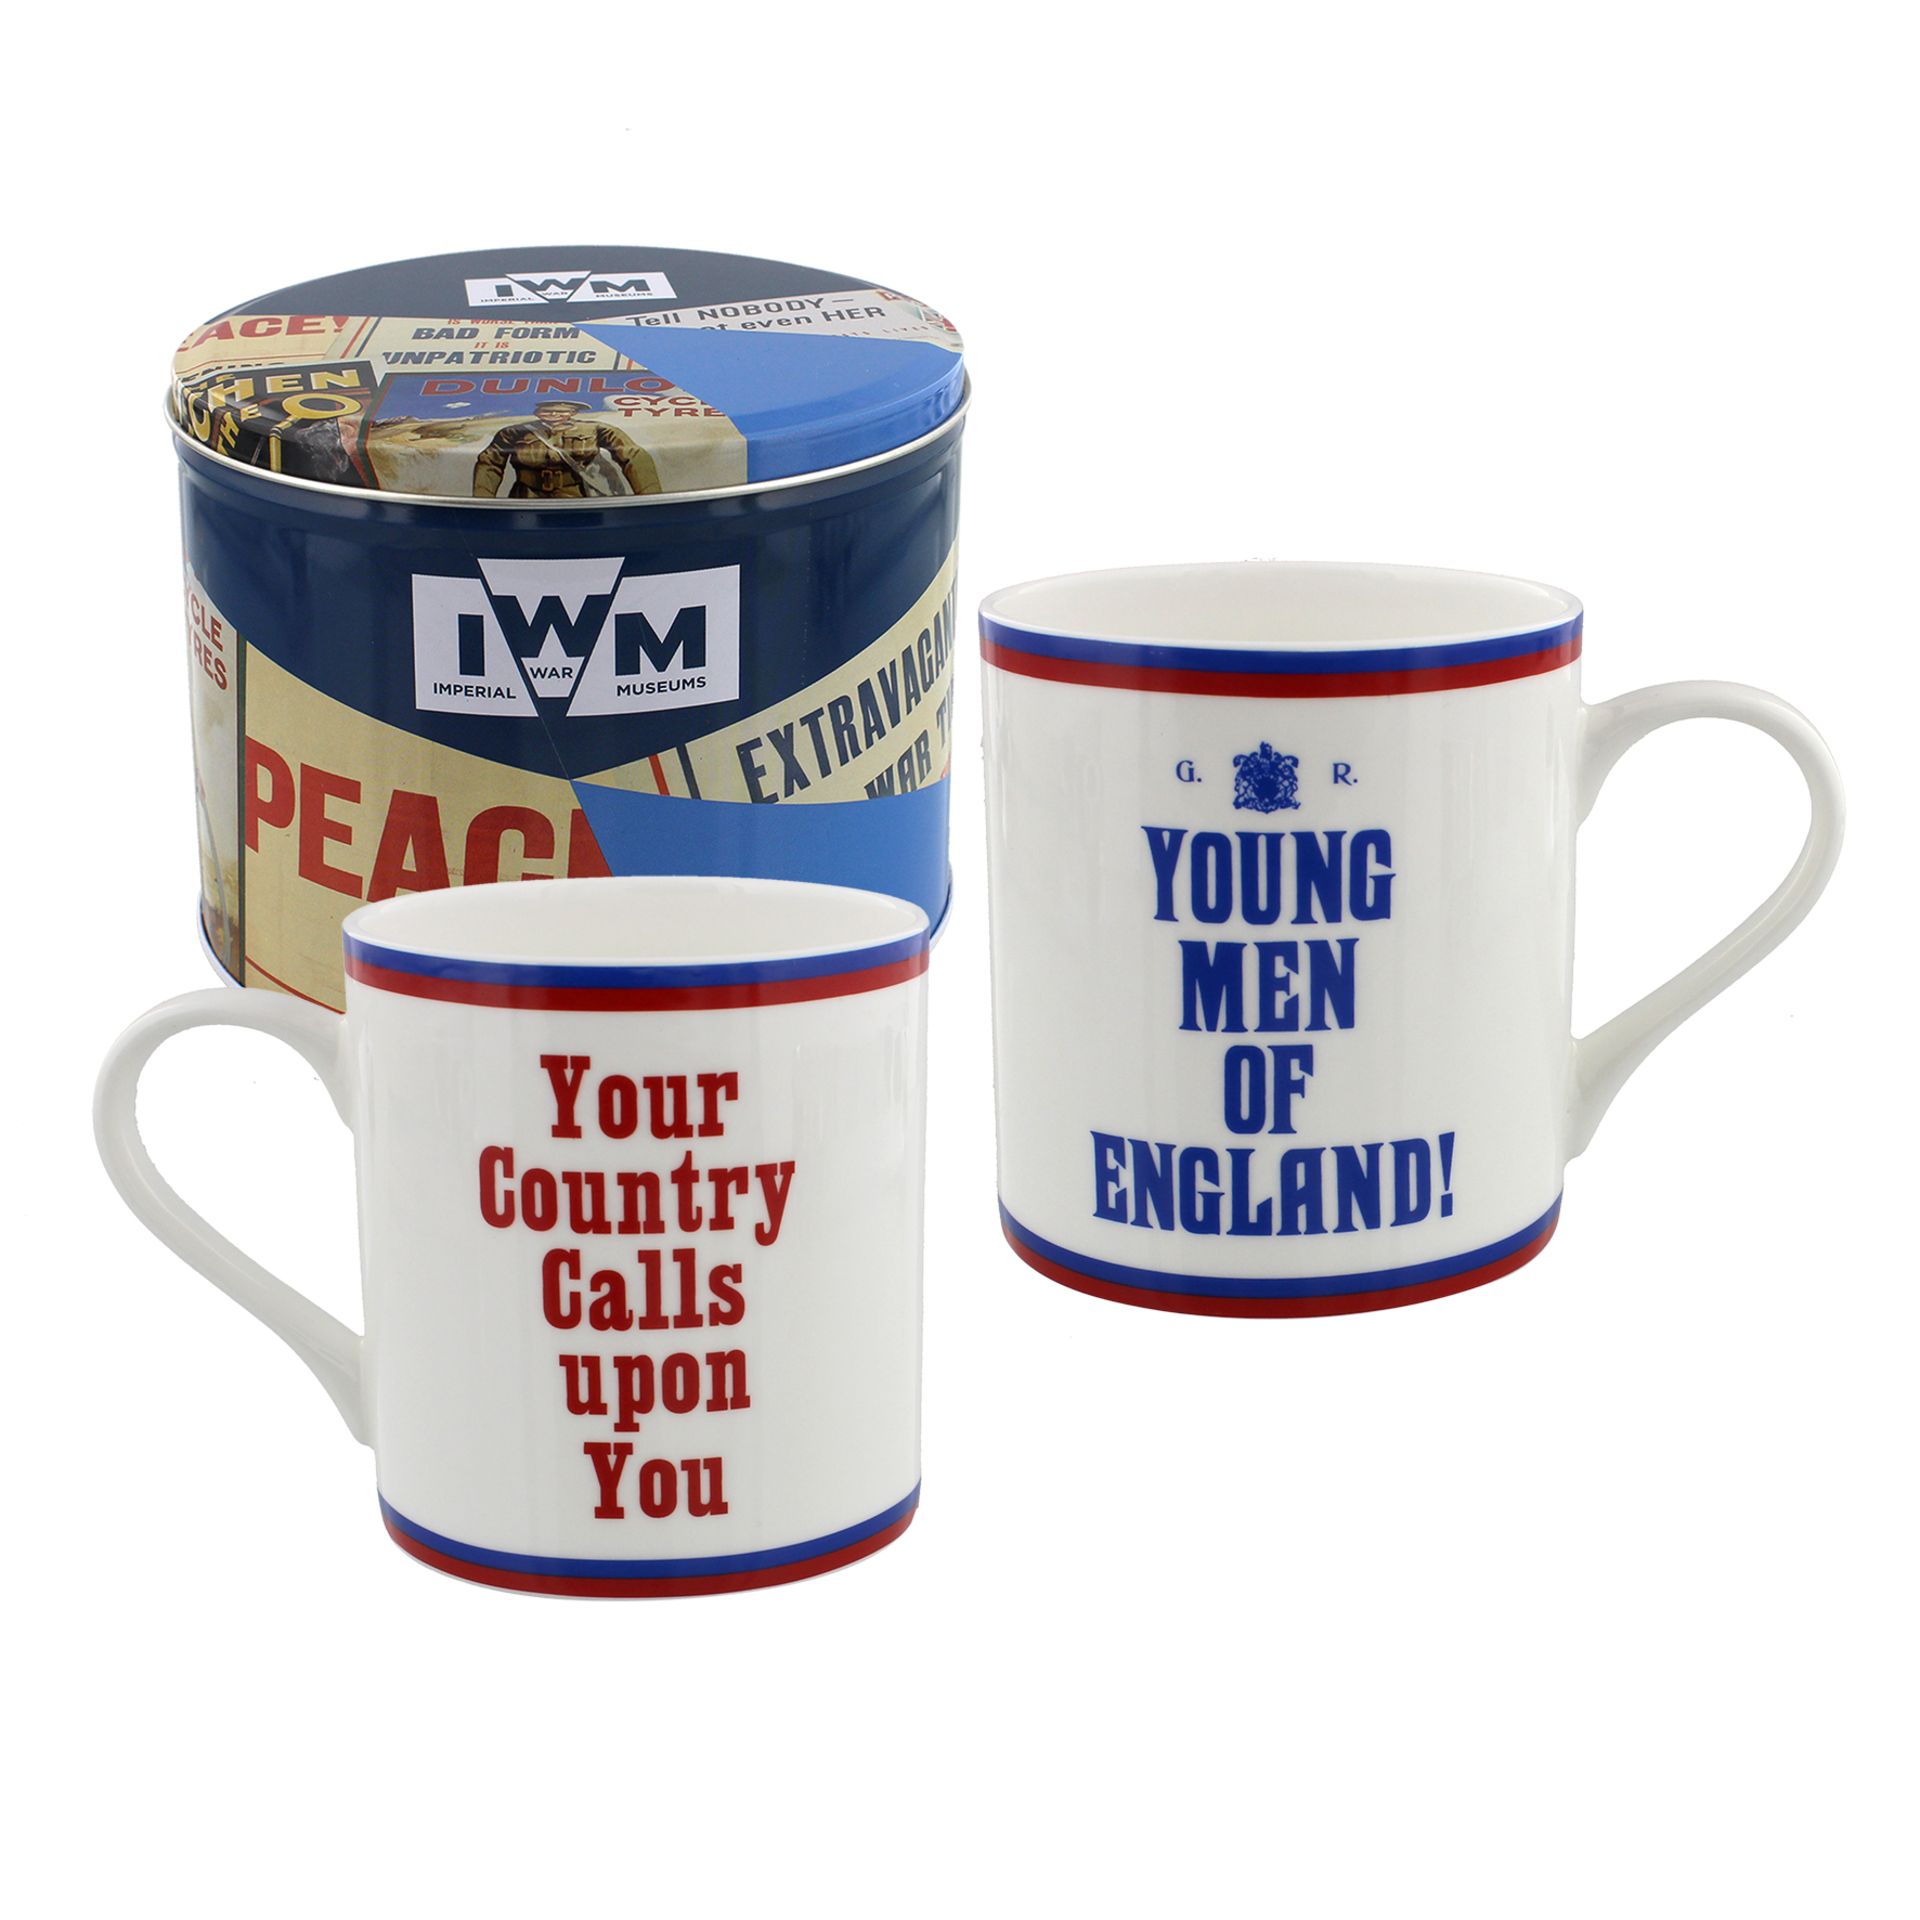 696x Ceramic Mugs 'Young Men of England! Your Country...' - Part of Imperial War Museum Collection